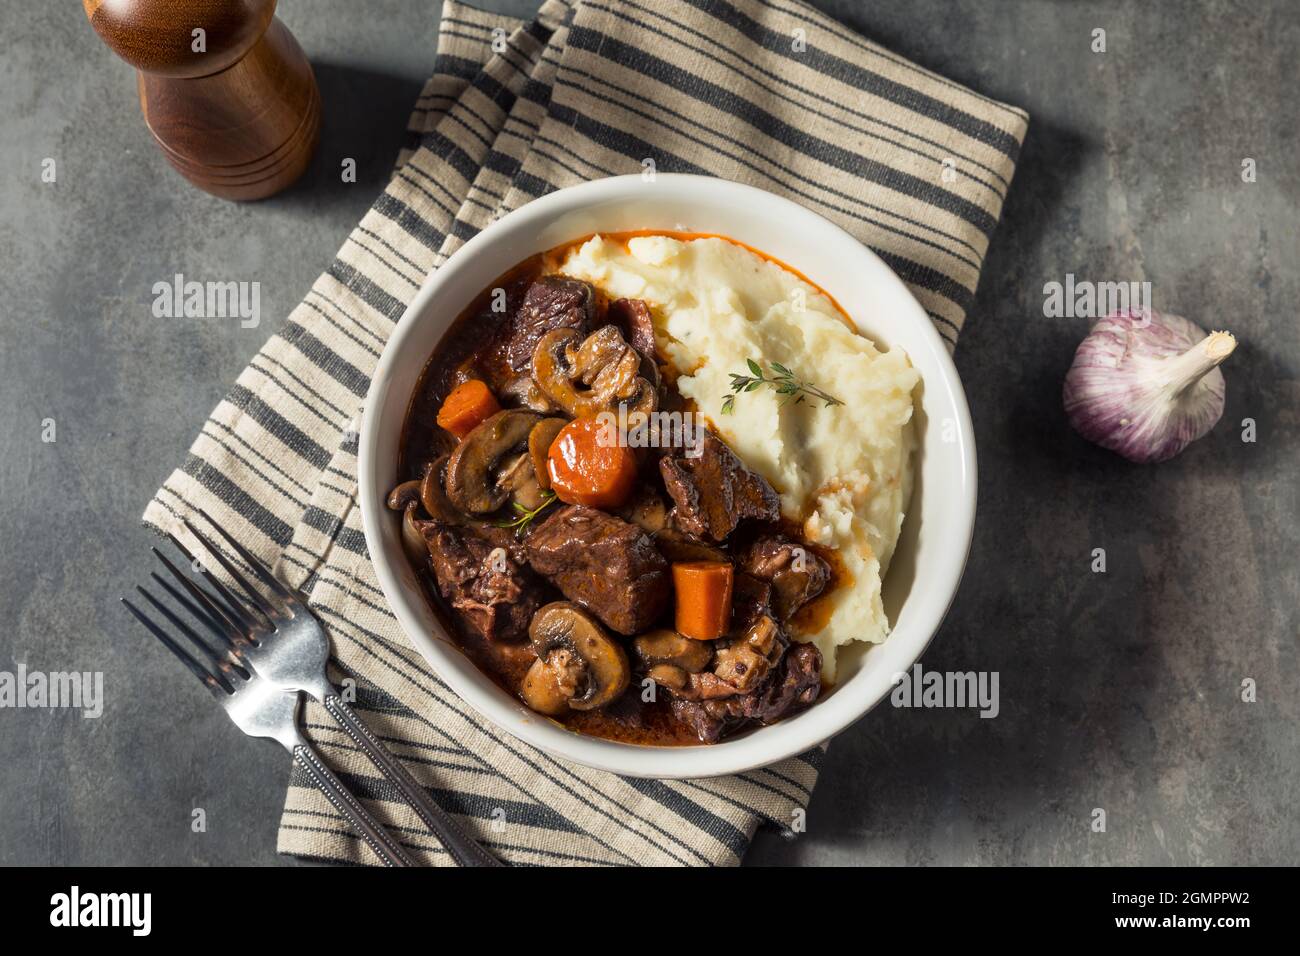 Homemade French Beef Bourguignon Stew with Mashed Potatoes Stock Photo